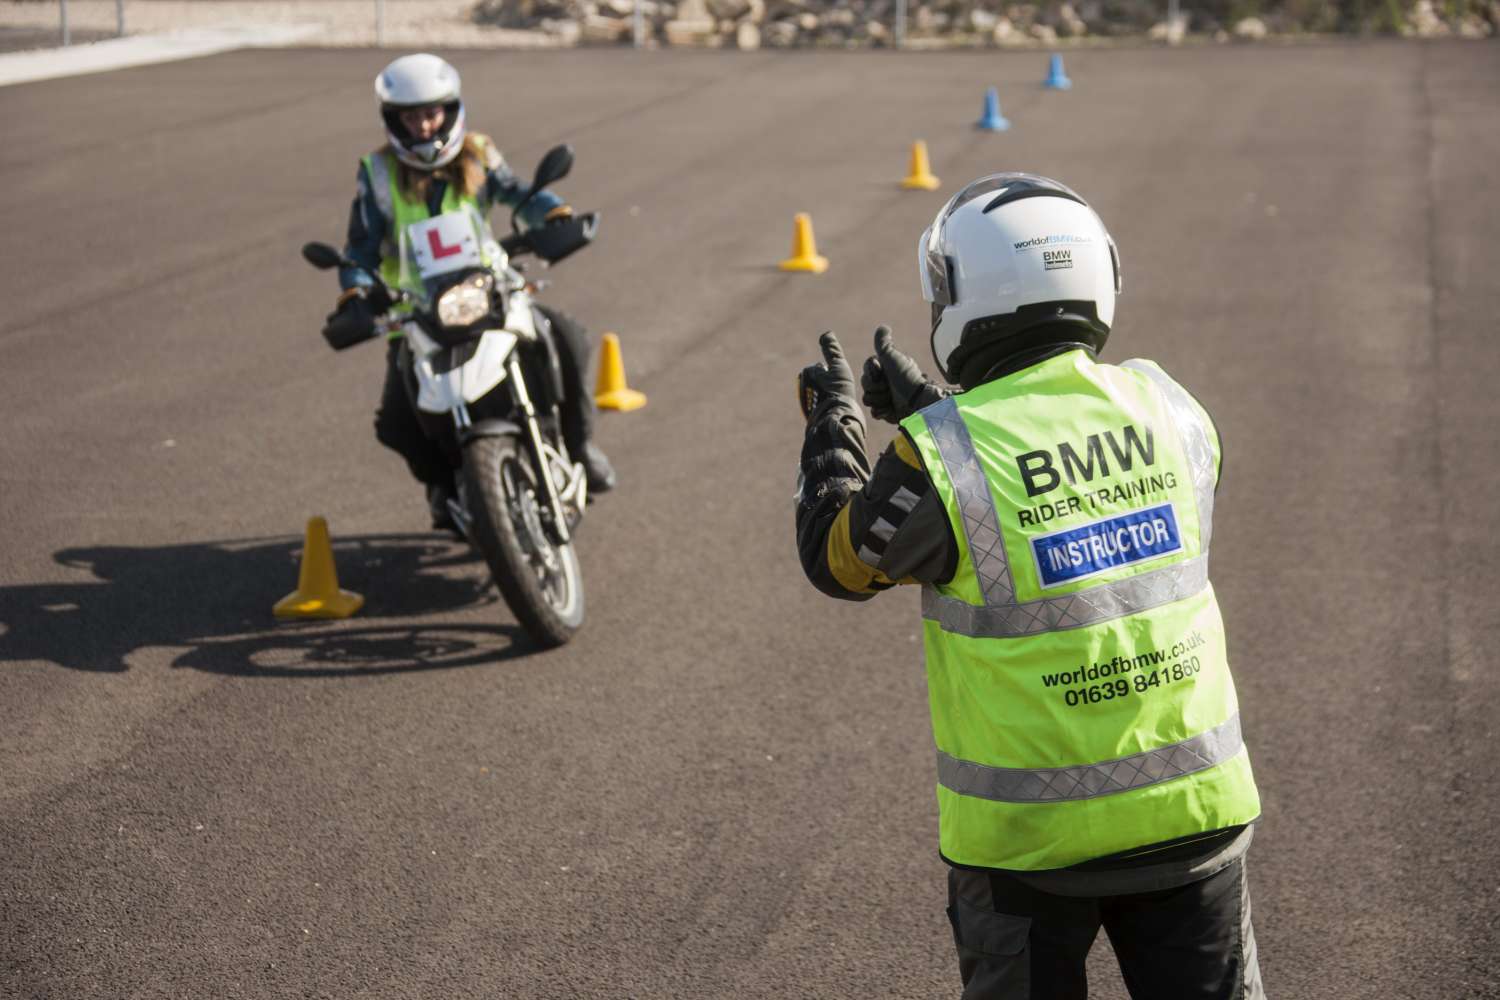 Scotland releases timeline for resuming motorcycle training and testing